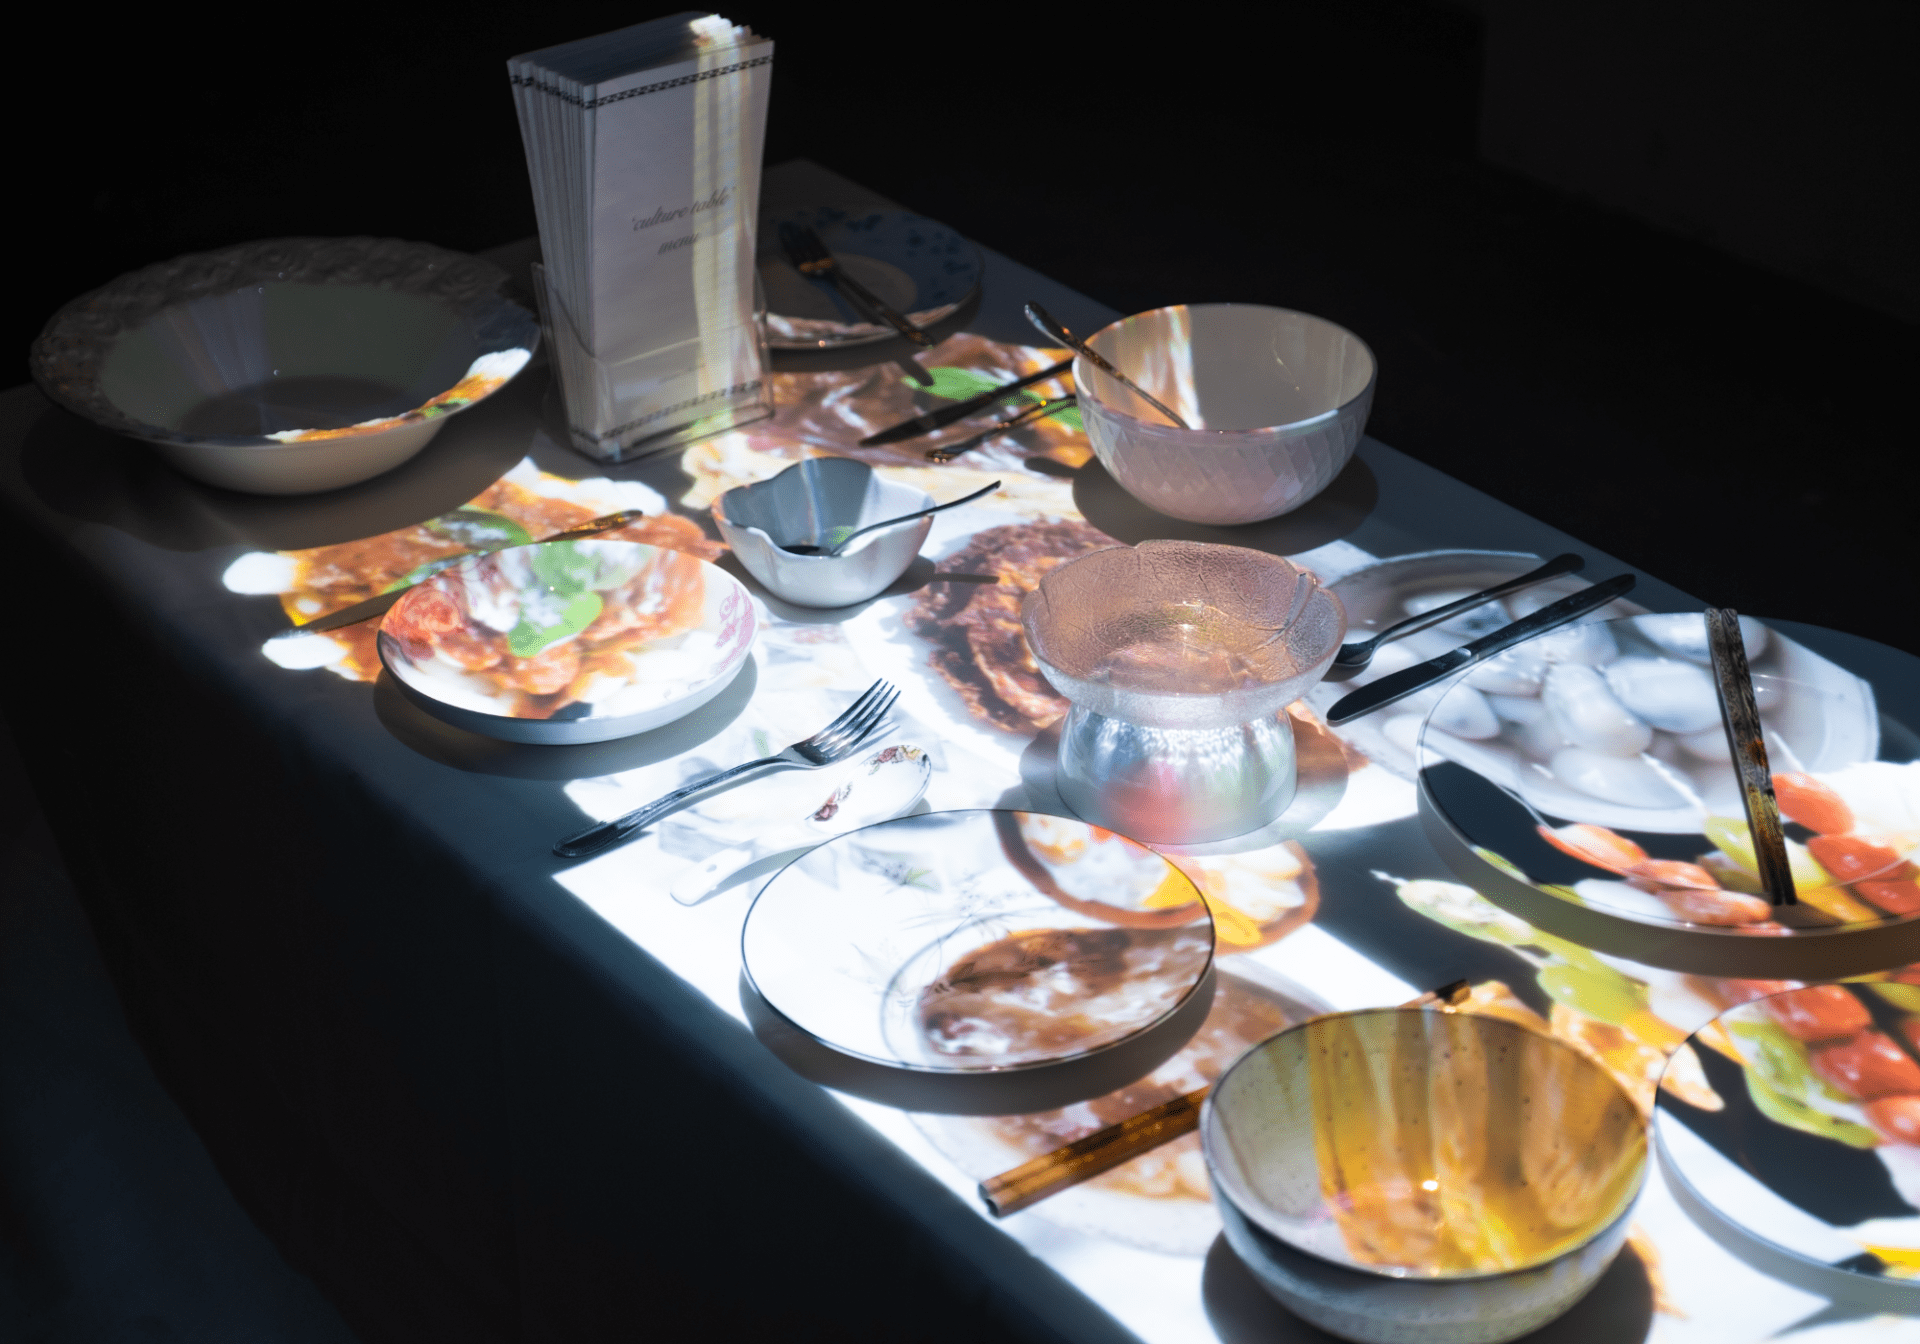 Photograph of a dinner table installation artwork. There are images of colourful multicultural food projected onto the table onto white plates and glassware.